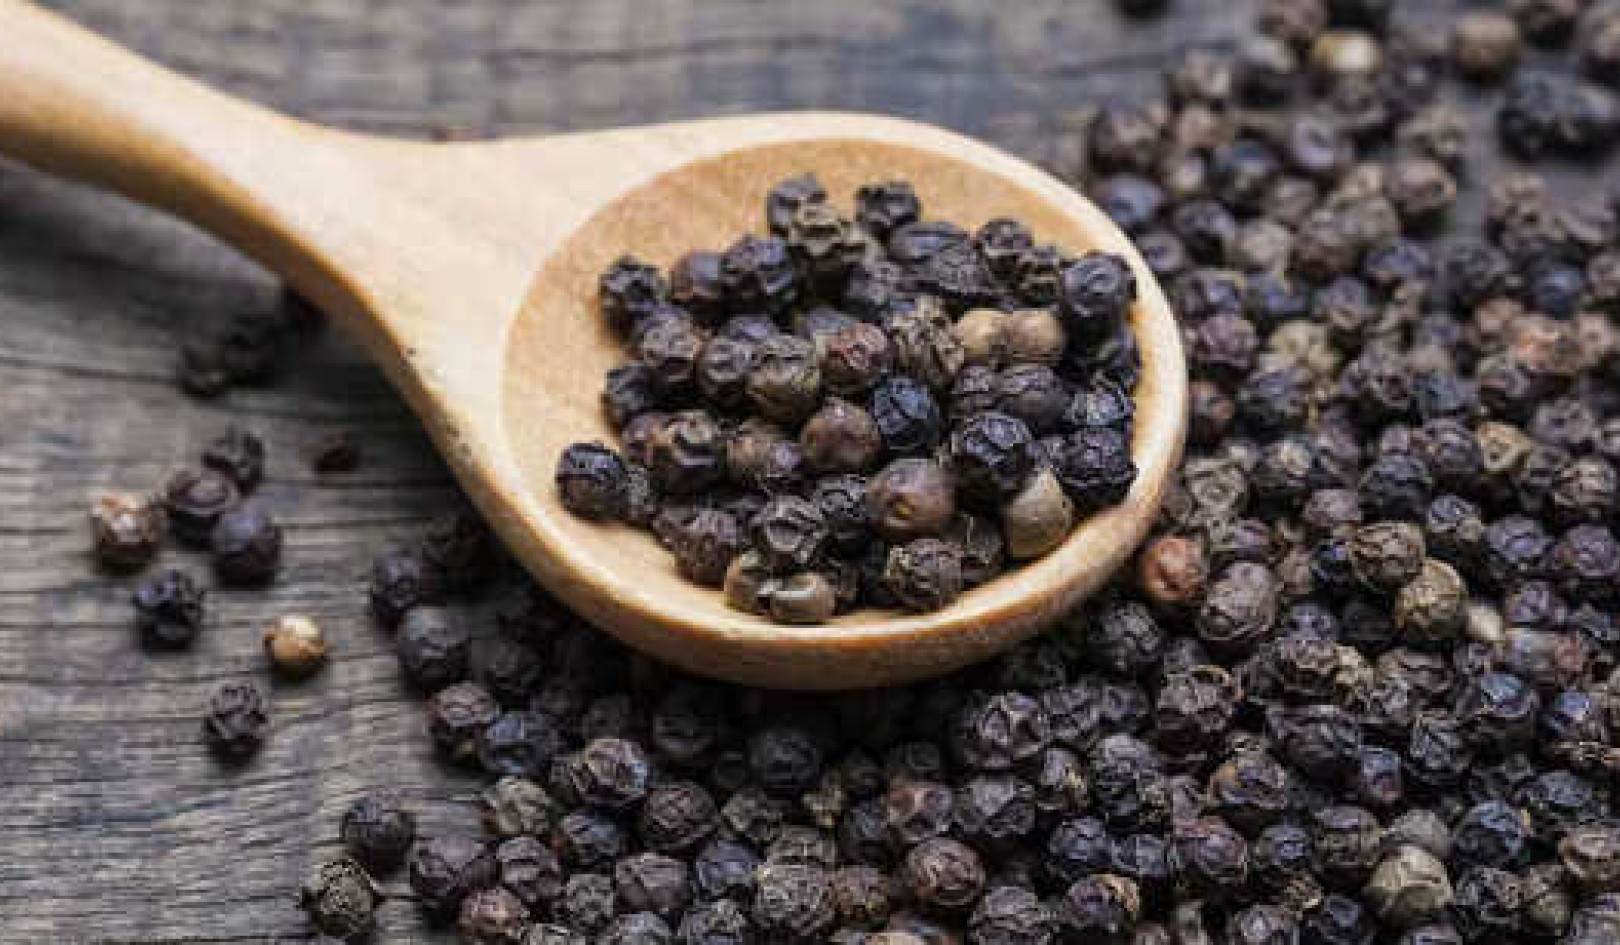 Is Black Pepper Healthy Or Not?